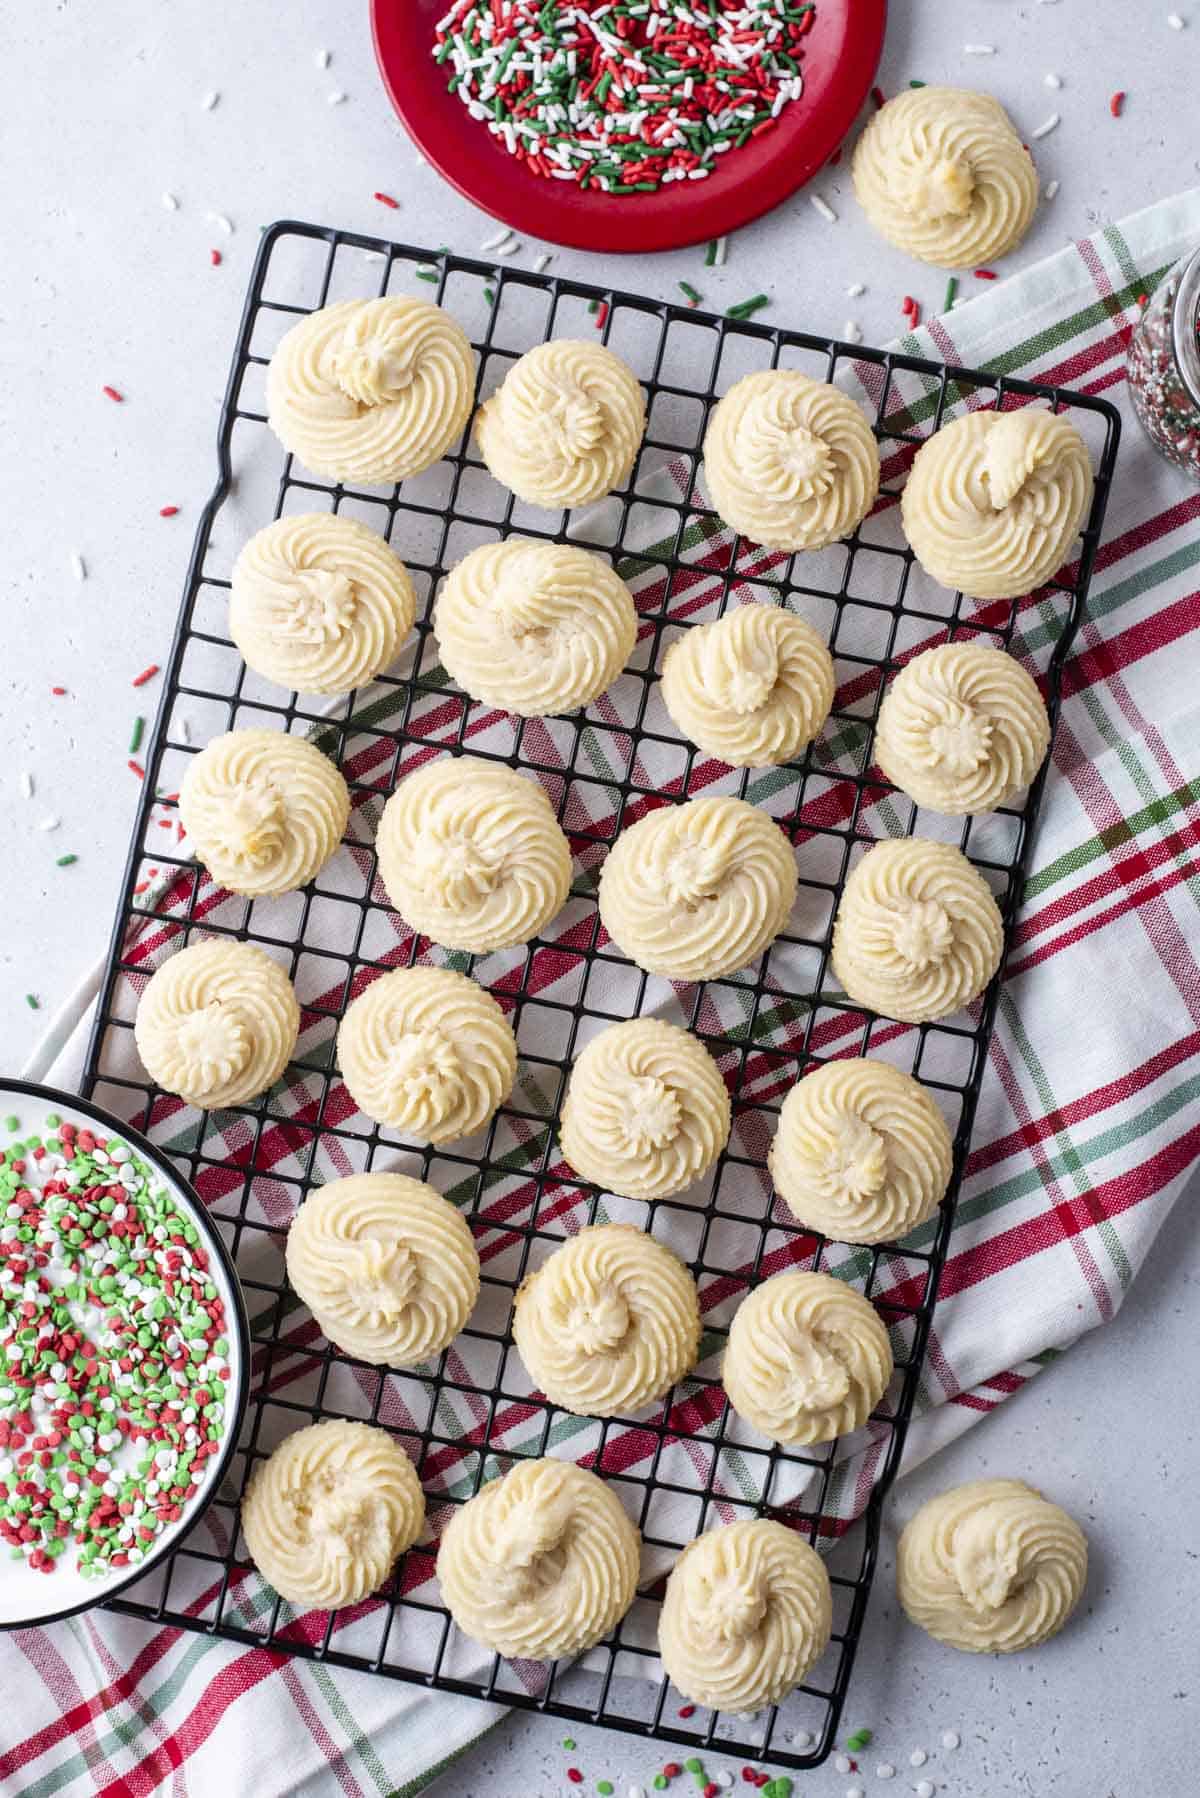 plain butter cookies in rows on a wire rack on top of a red white and green kitchen towel with a bowl of red, white and green sprinkles